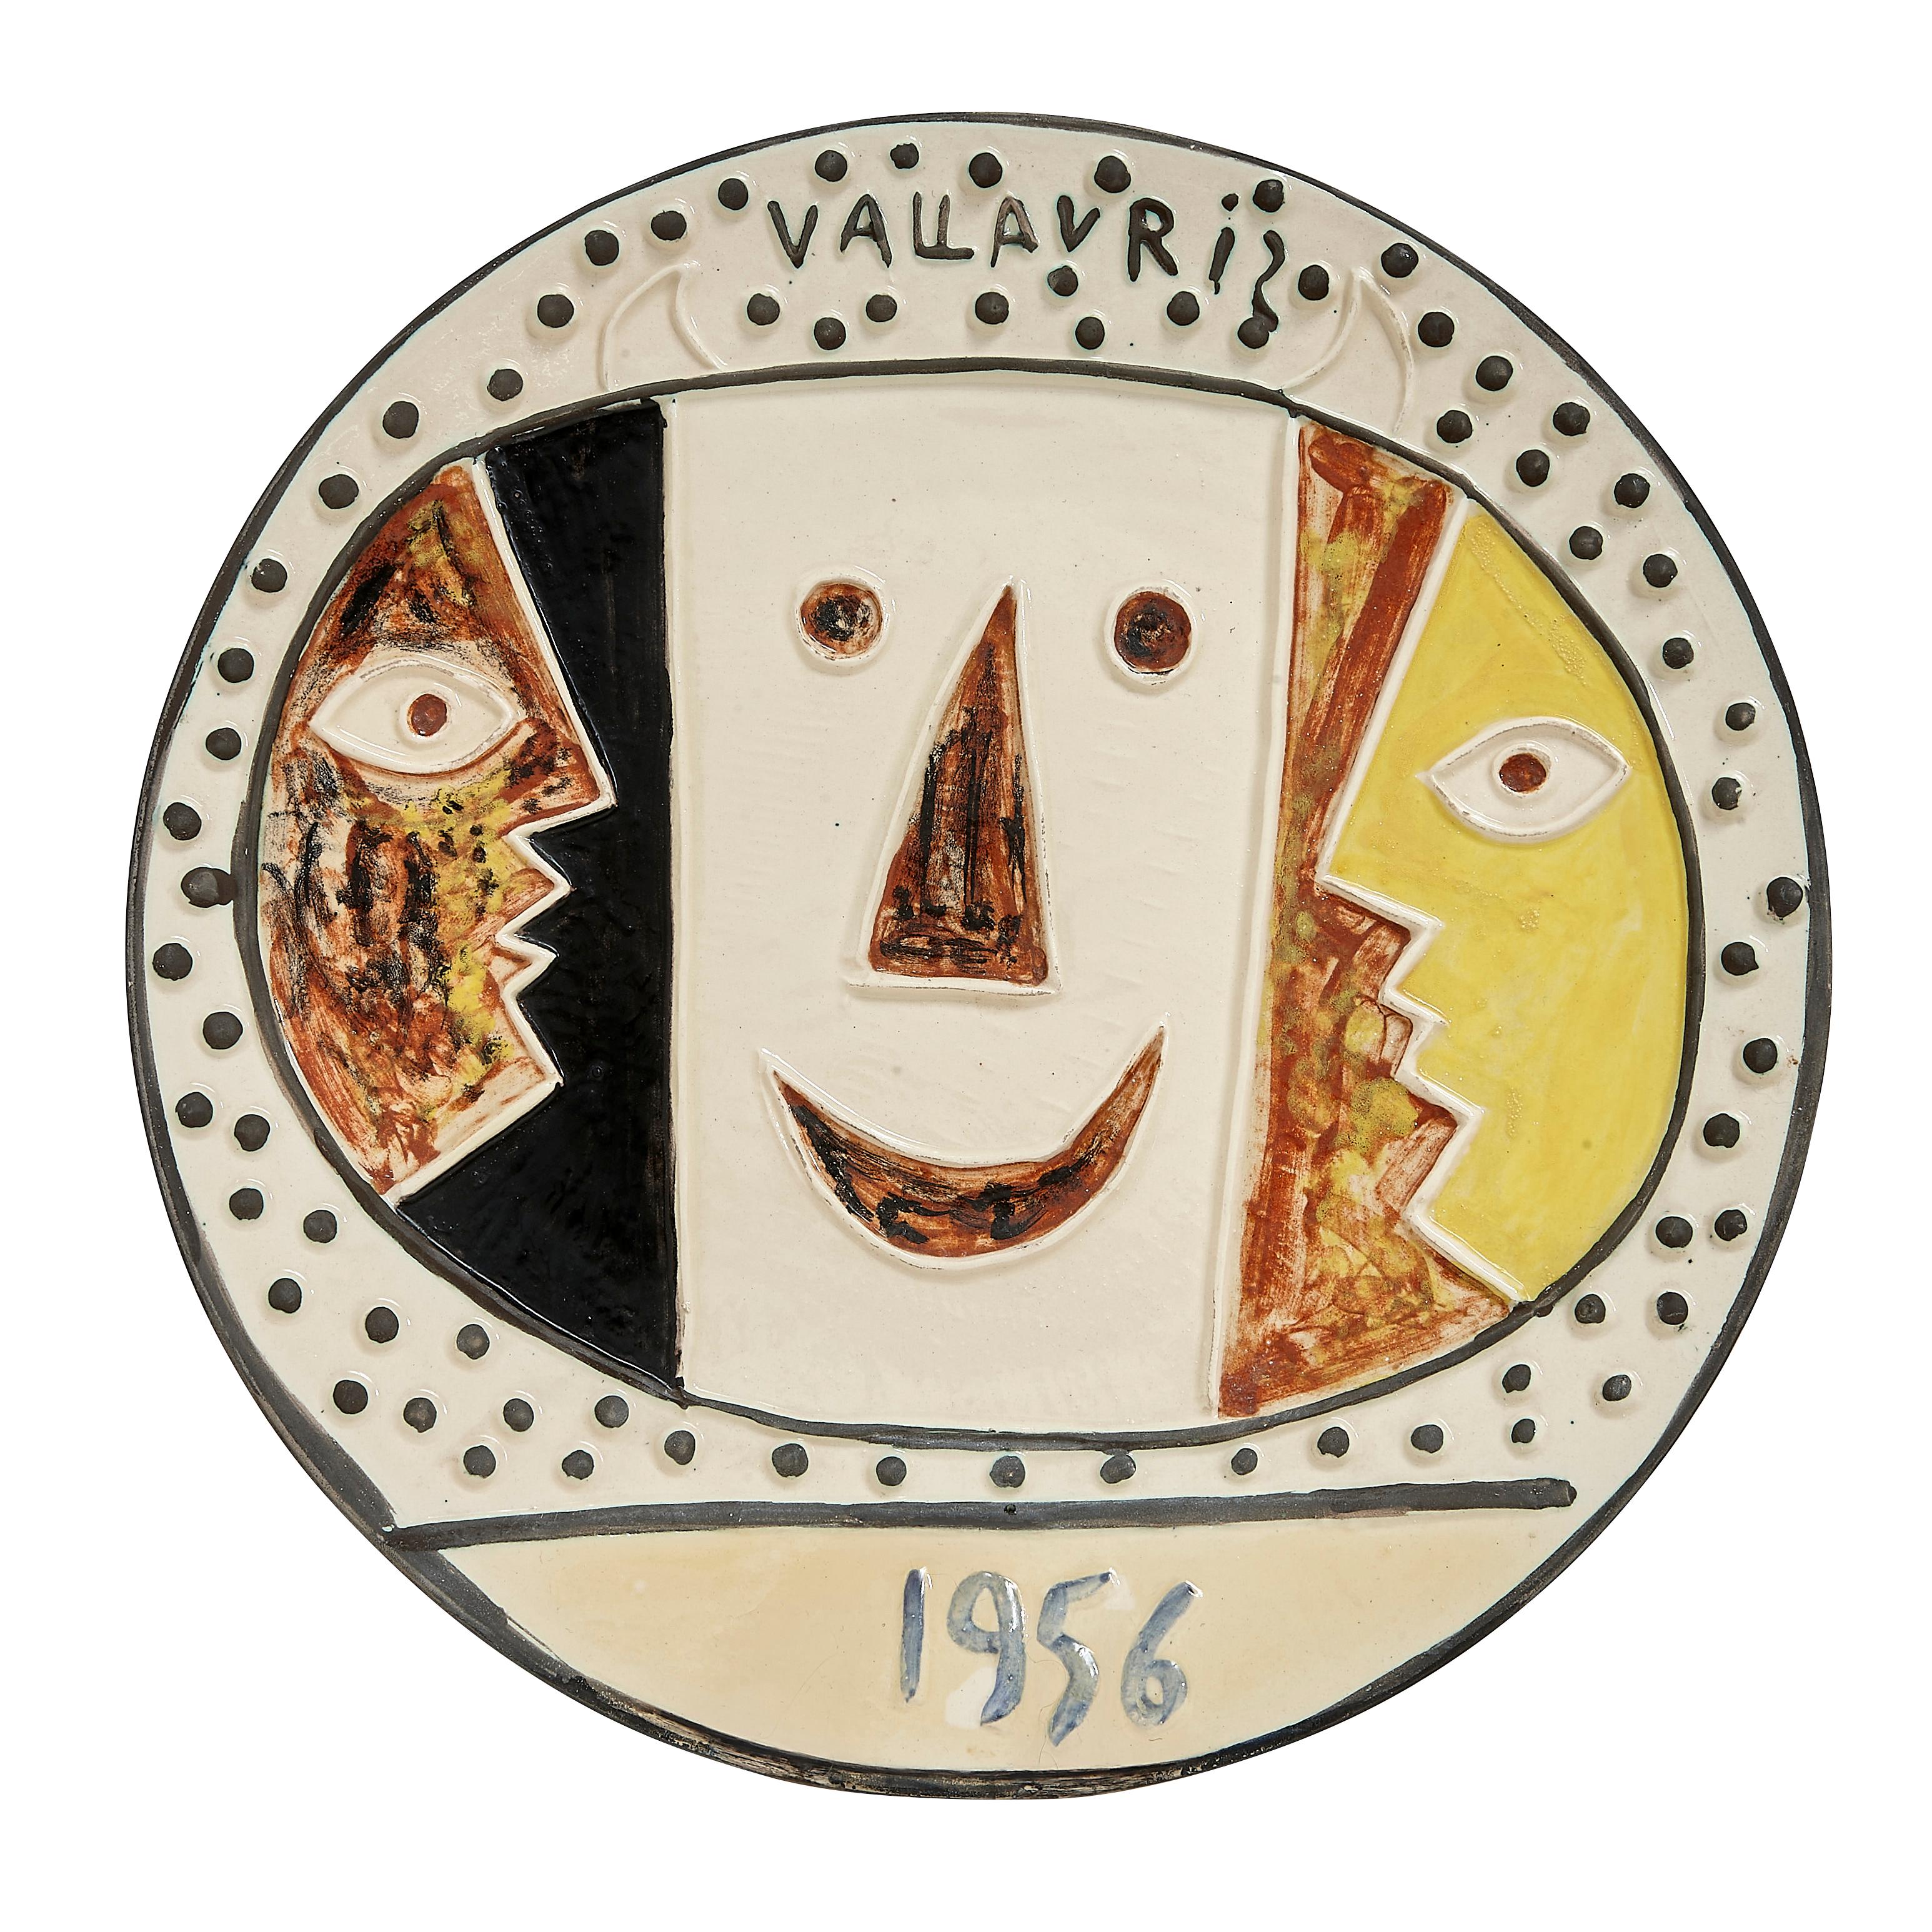 PABLO PICASSO (1881-1973) 
Vallauris (A. R. 331)

Terre de faïence plate, painted in colors and glazed, 1956, from the edition of 100. Numbered 50/100 and incised C 103, with the Empreinte Originale de Picasso and Madoura stamps (on the reverse).